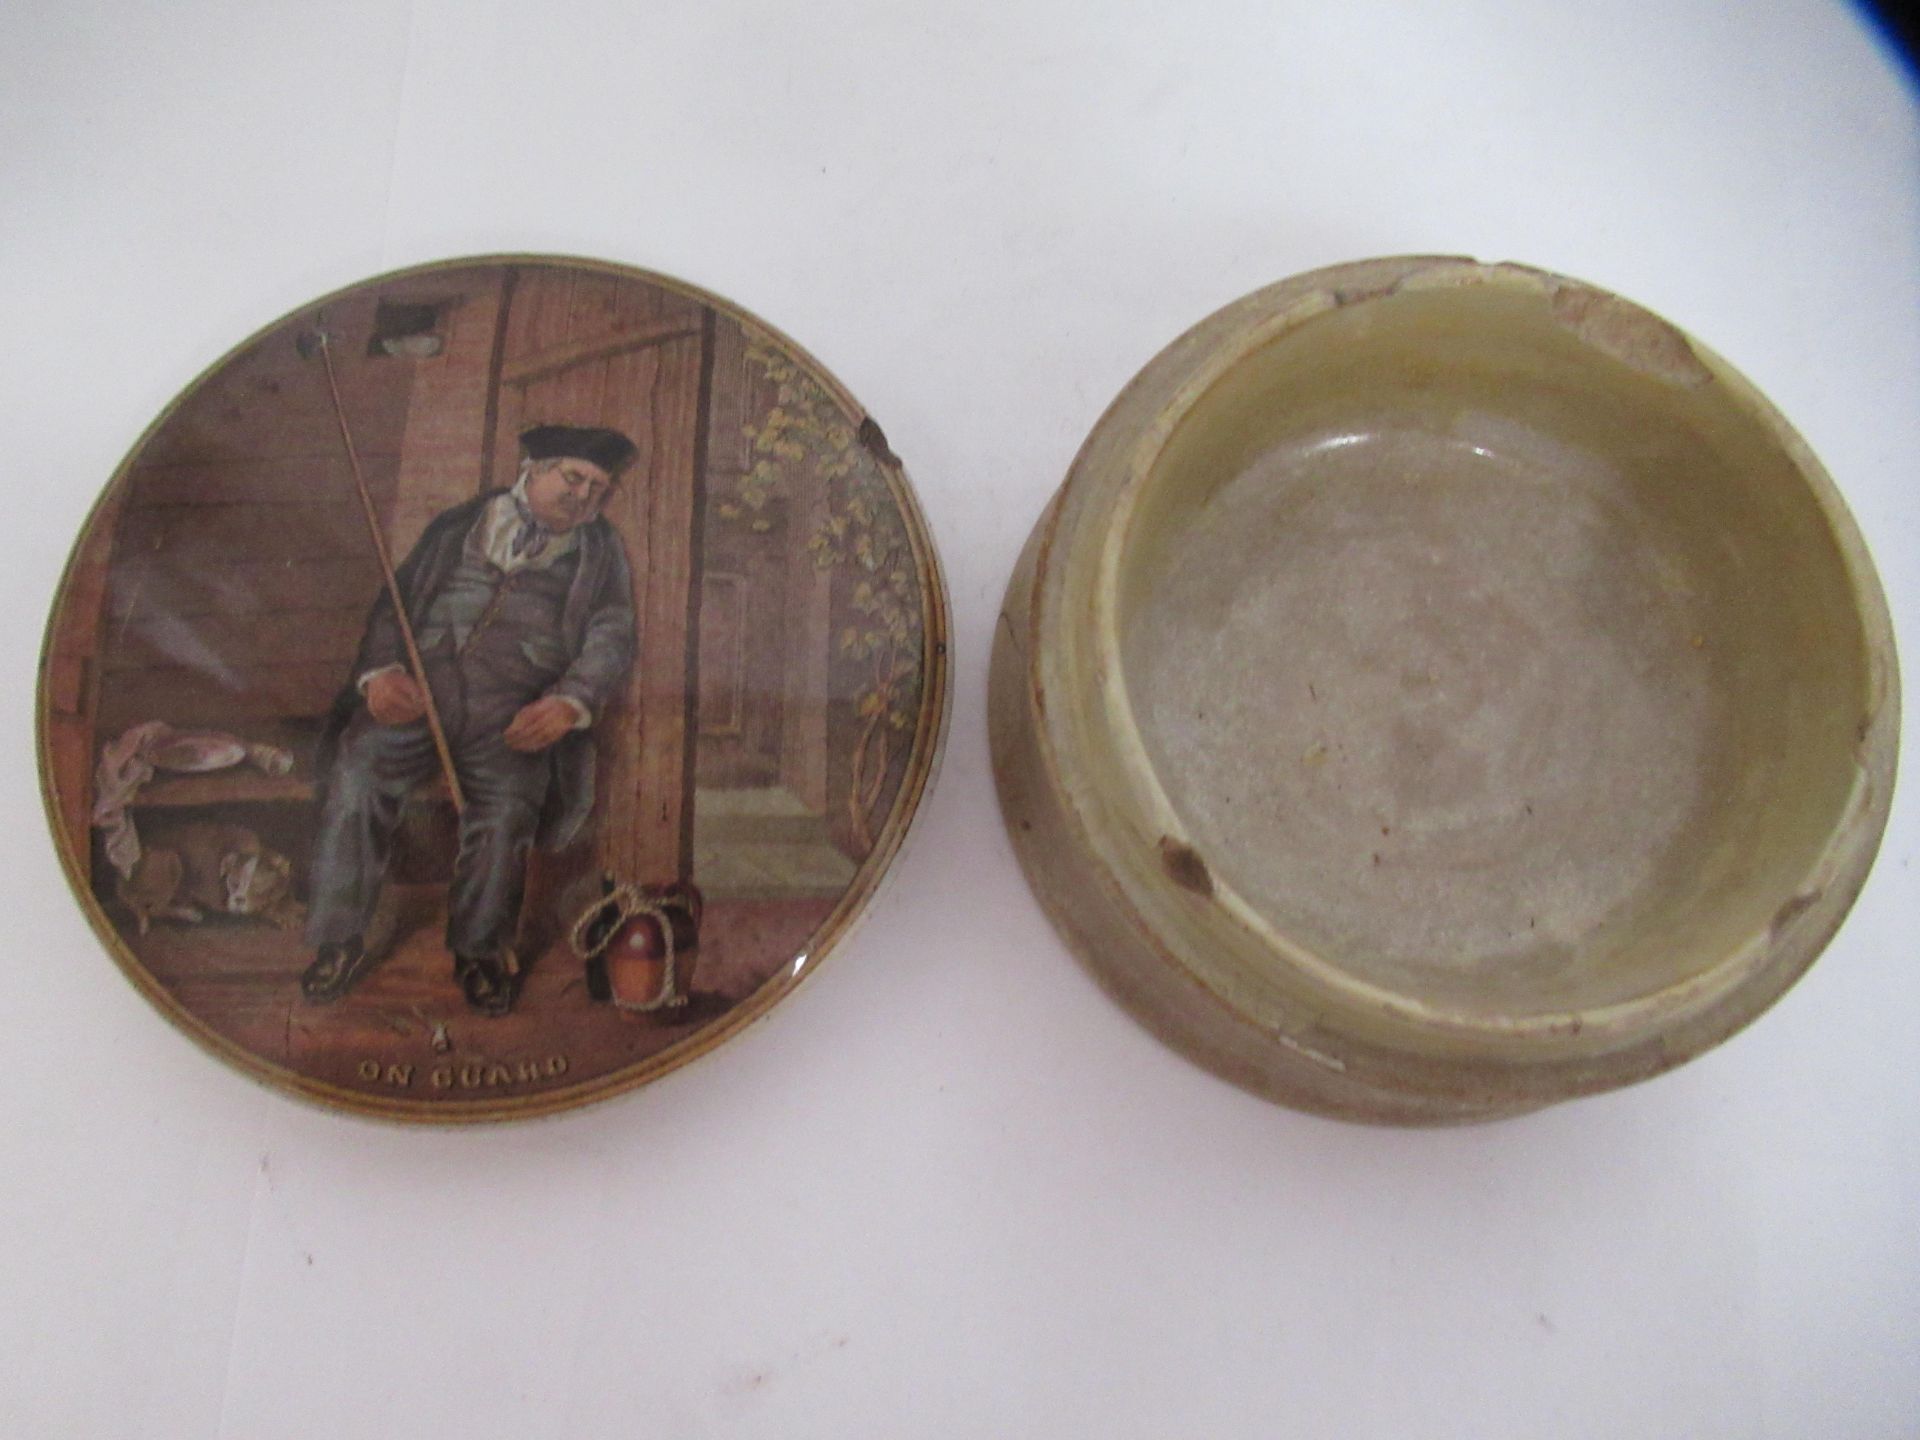 6x Prattware ceramic lids including 'On Guard', 'The Rivals', 'The Cavalier', and 'Peace' - Image 14 of 37